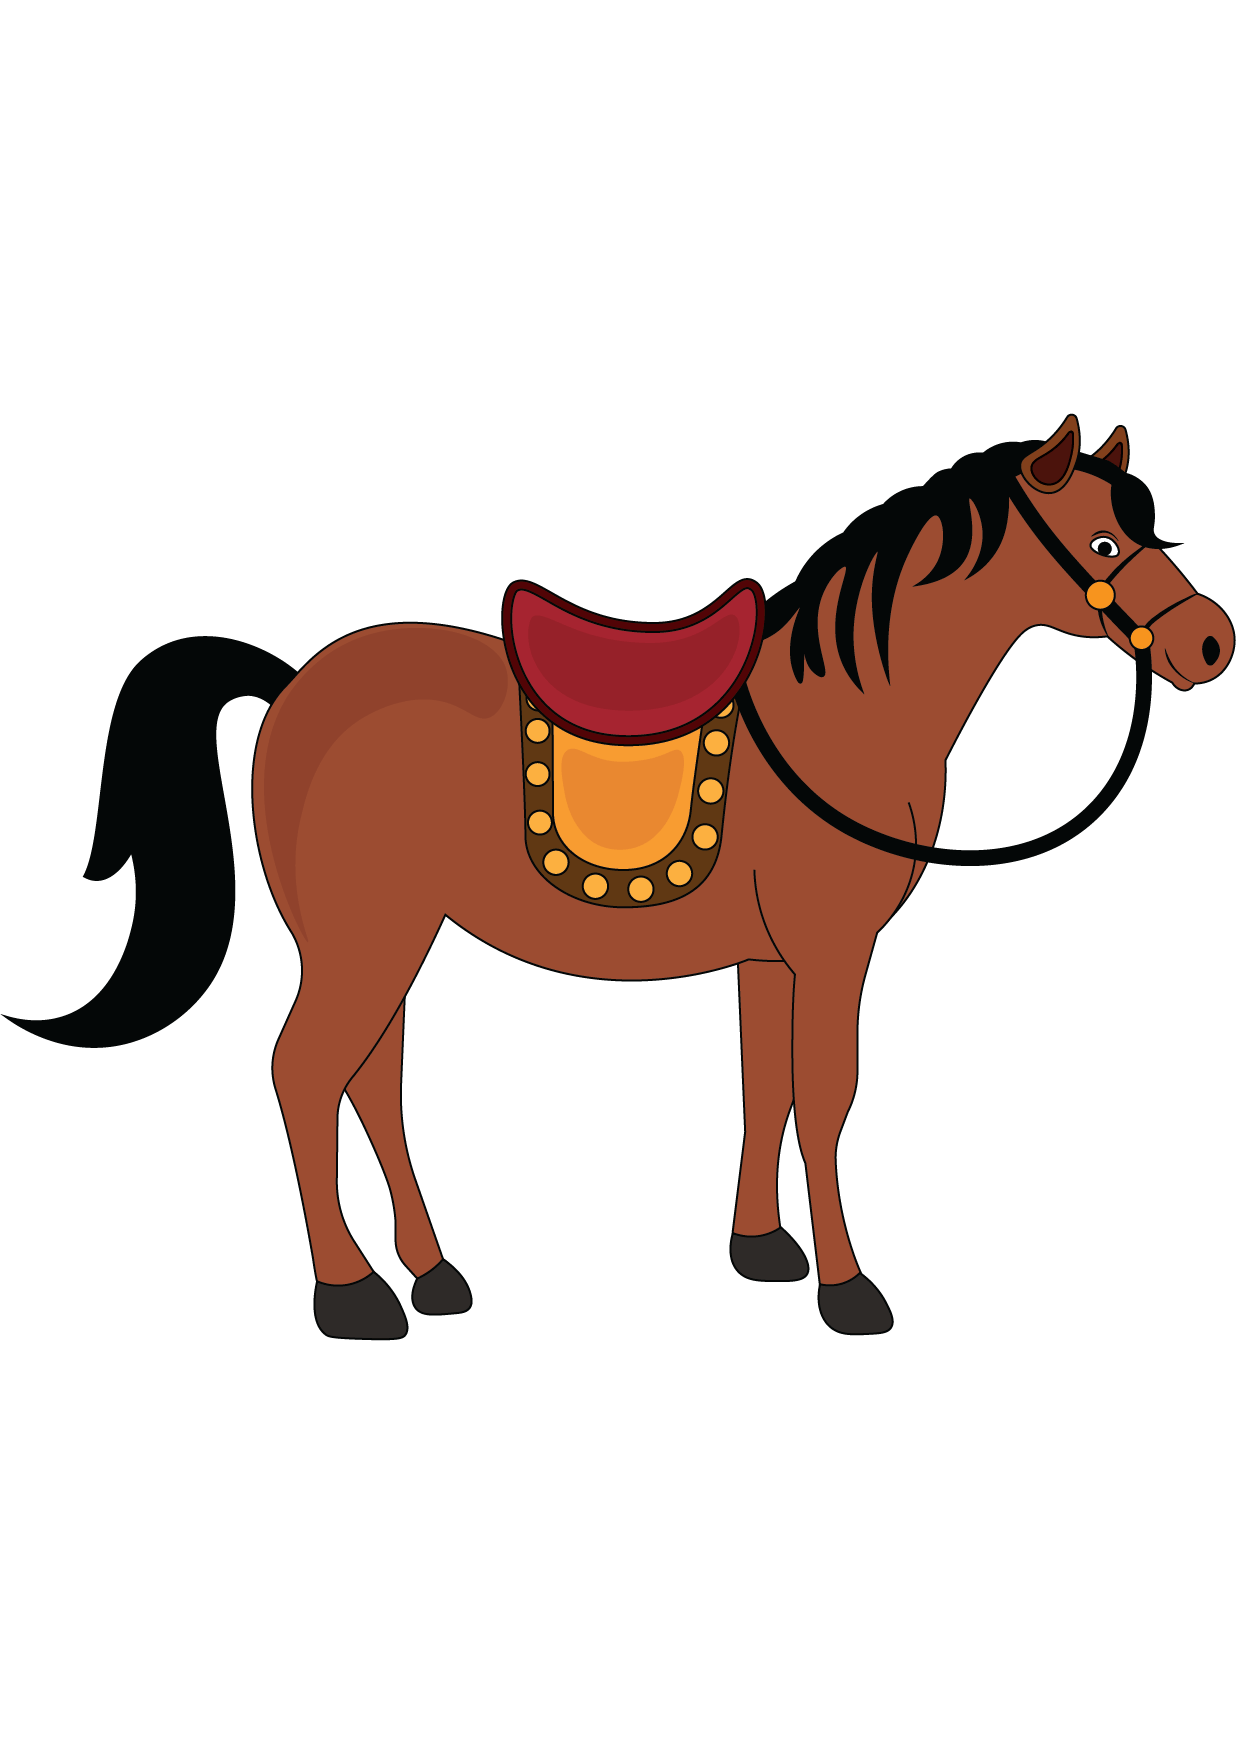 How to Draw A Horse Step by Step Printable